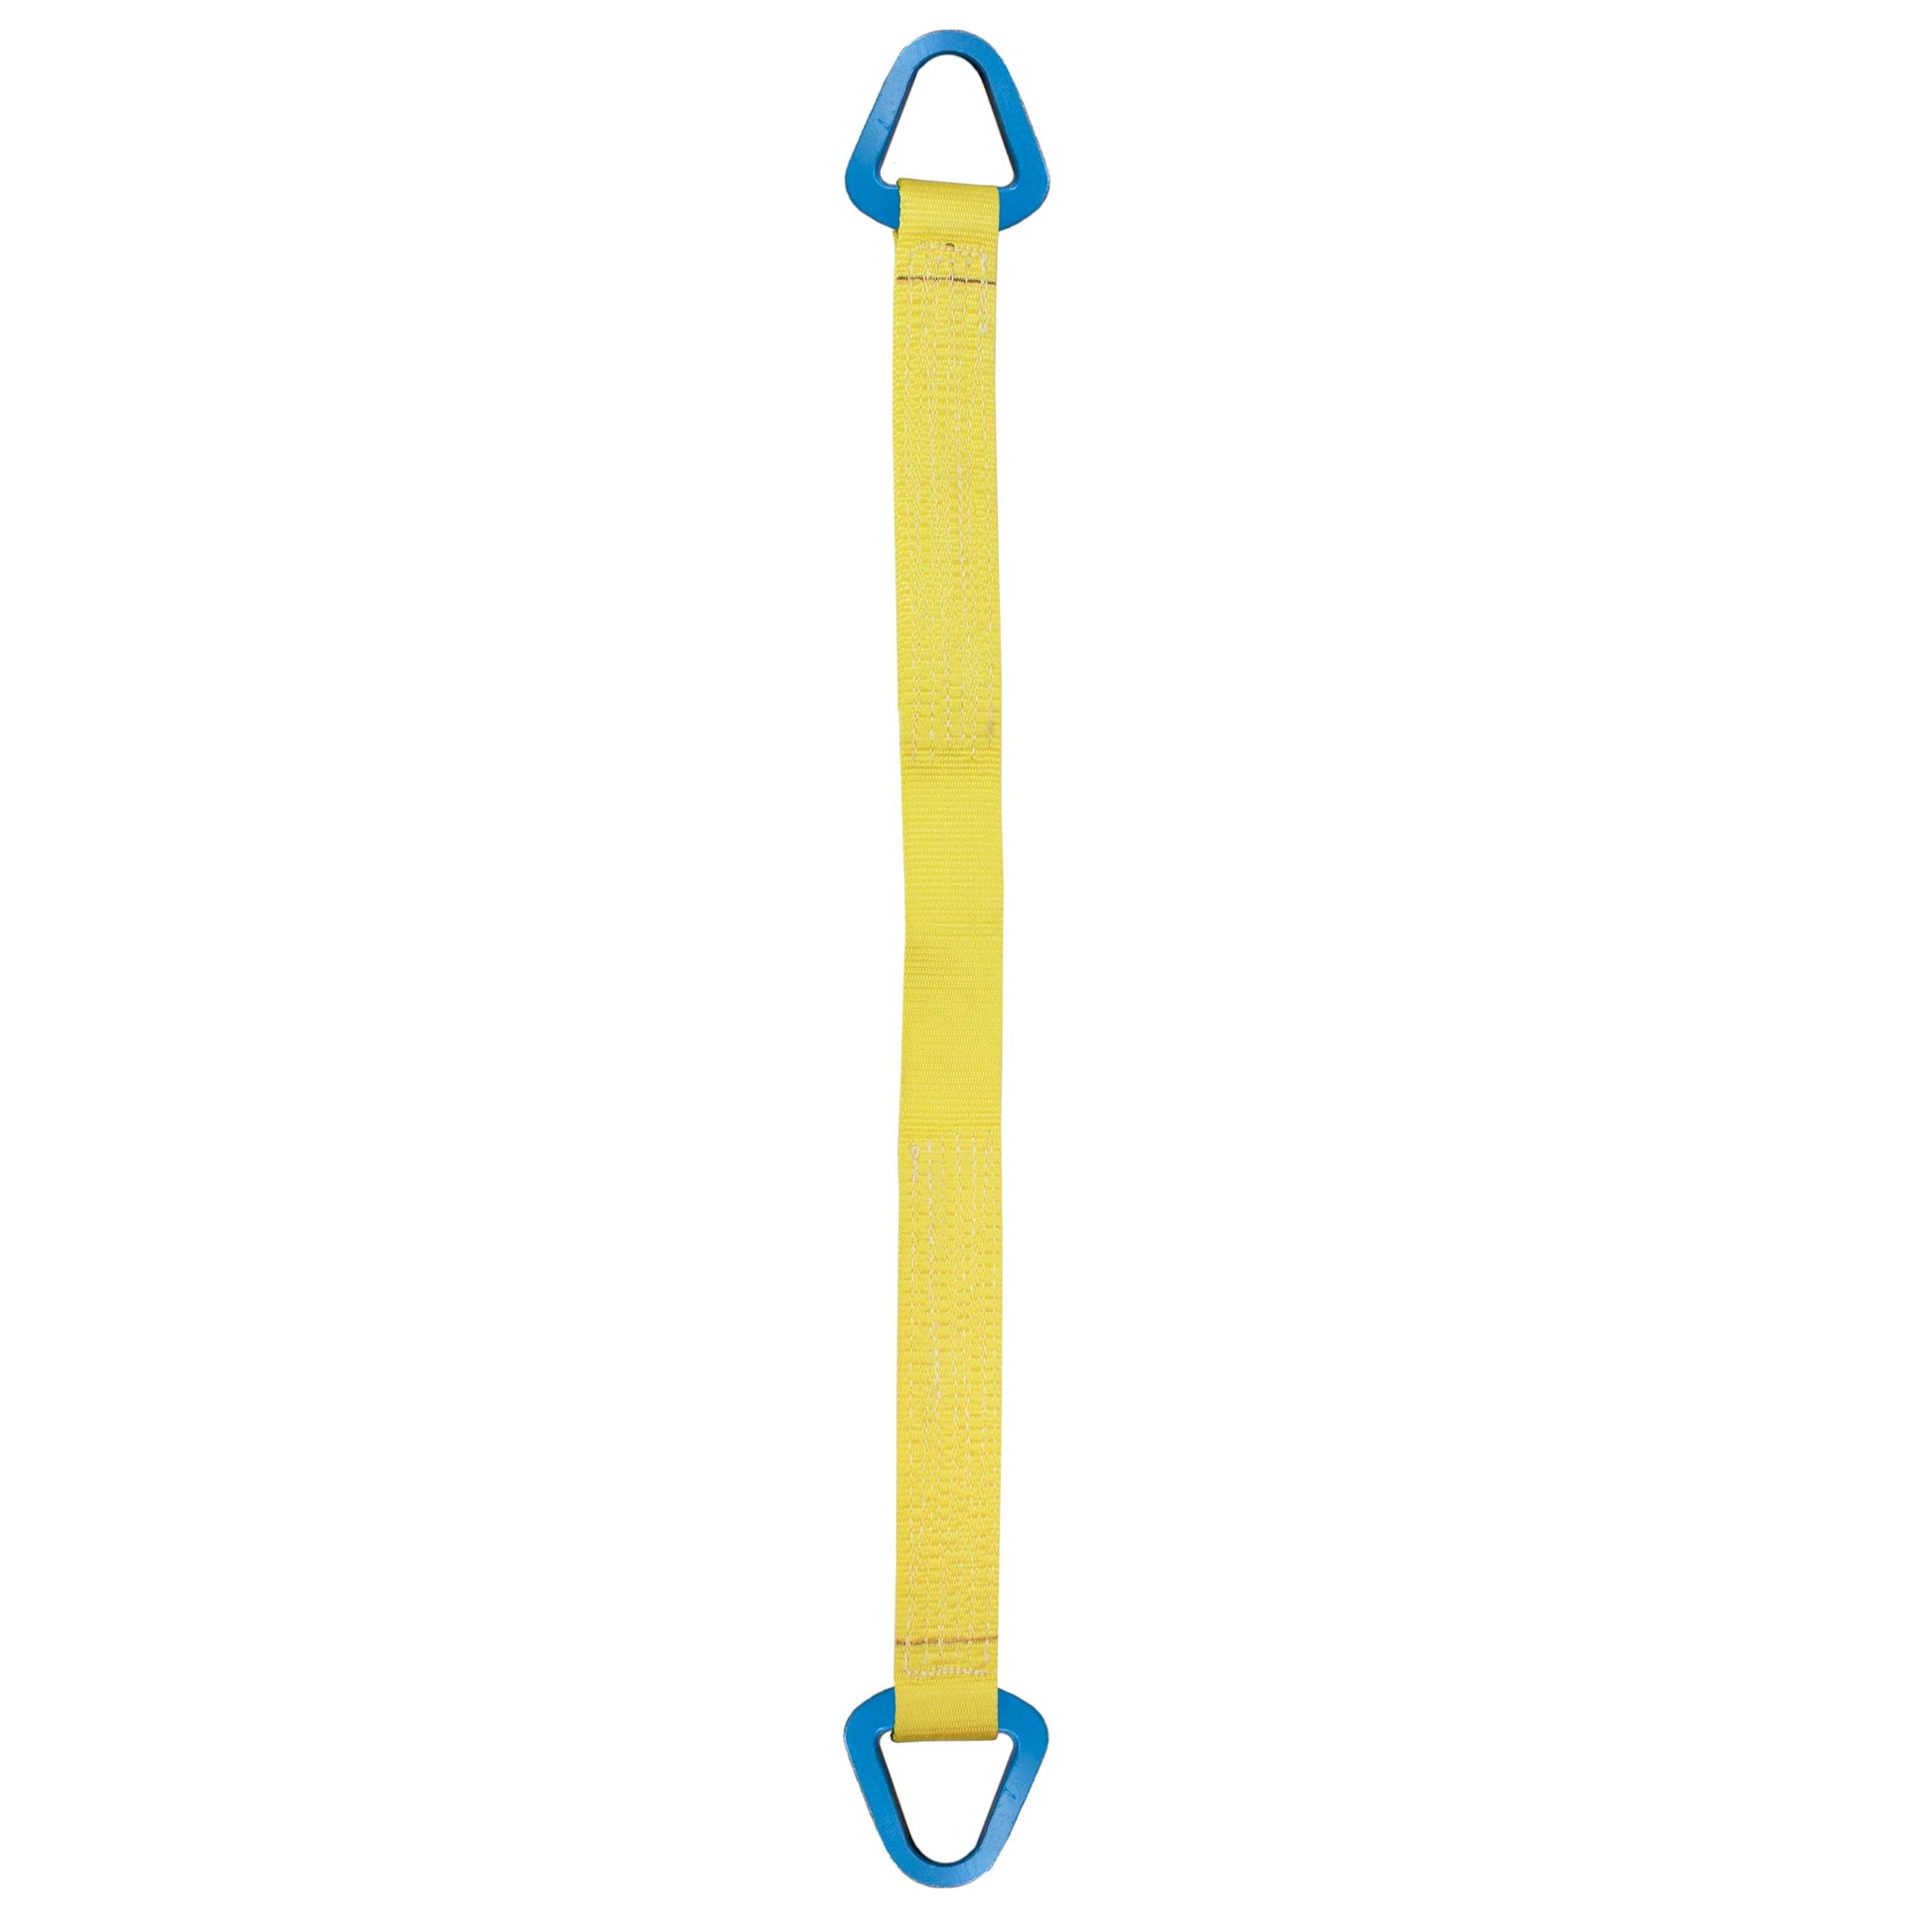 Nylon Lifting Sling Triangle 12 inch x 8 foot 1ply image 1 of 2